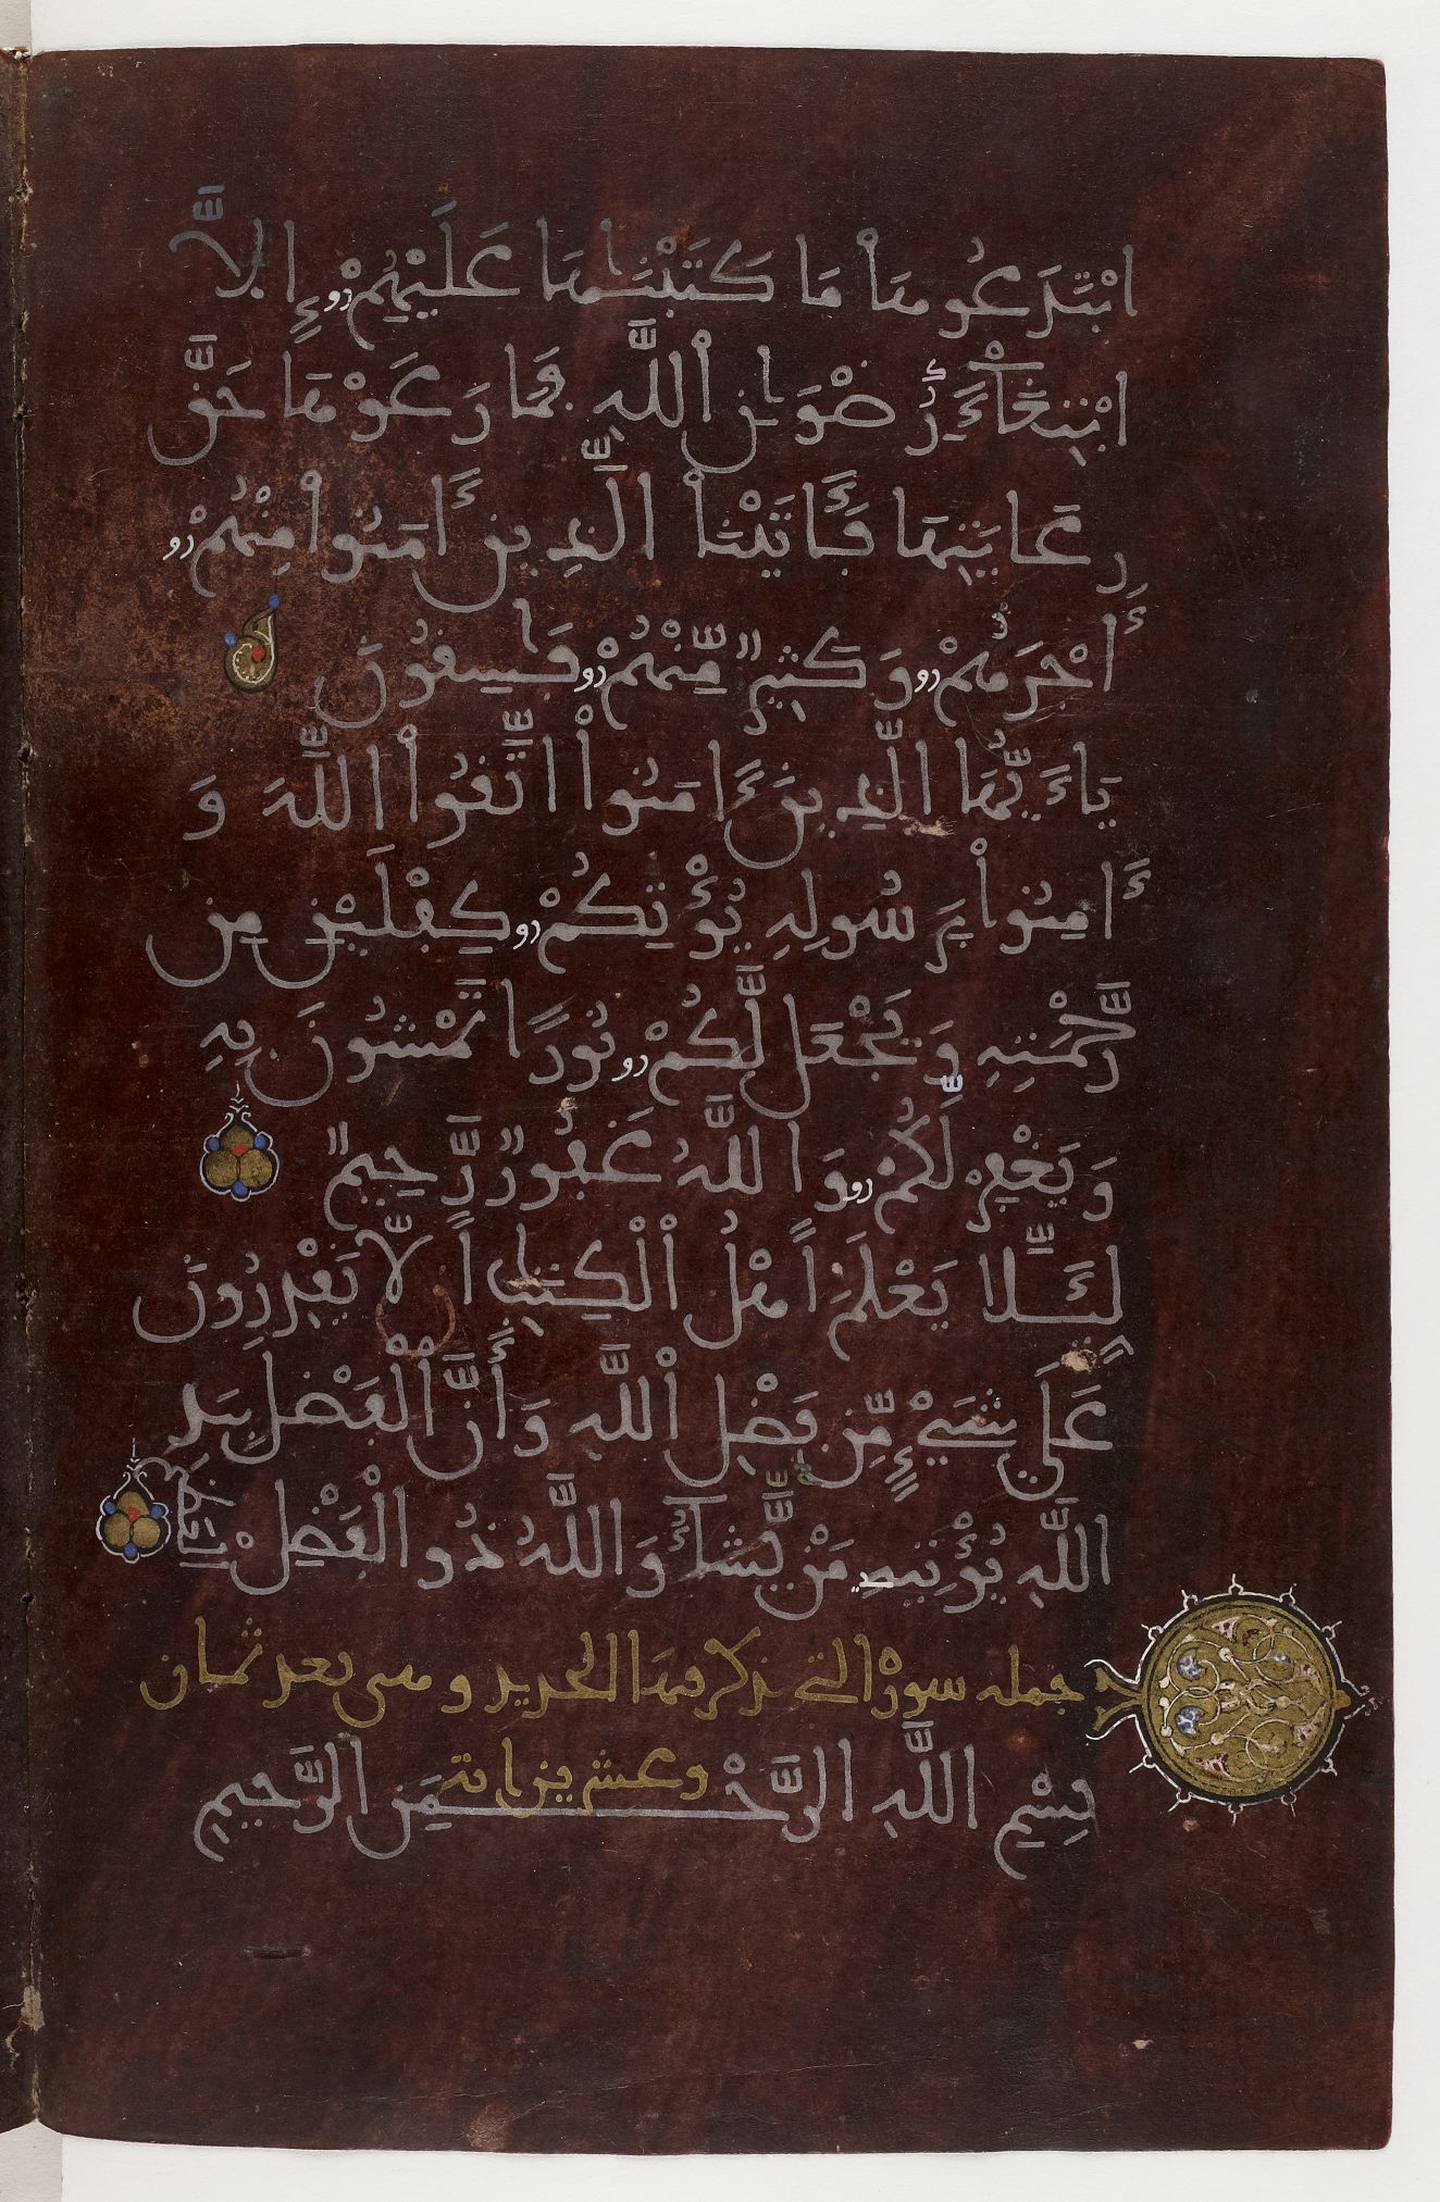 'Purple Quran' from the collection of the National Library of France. Photo: National Library of France